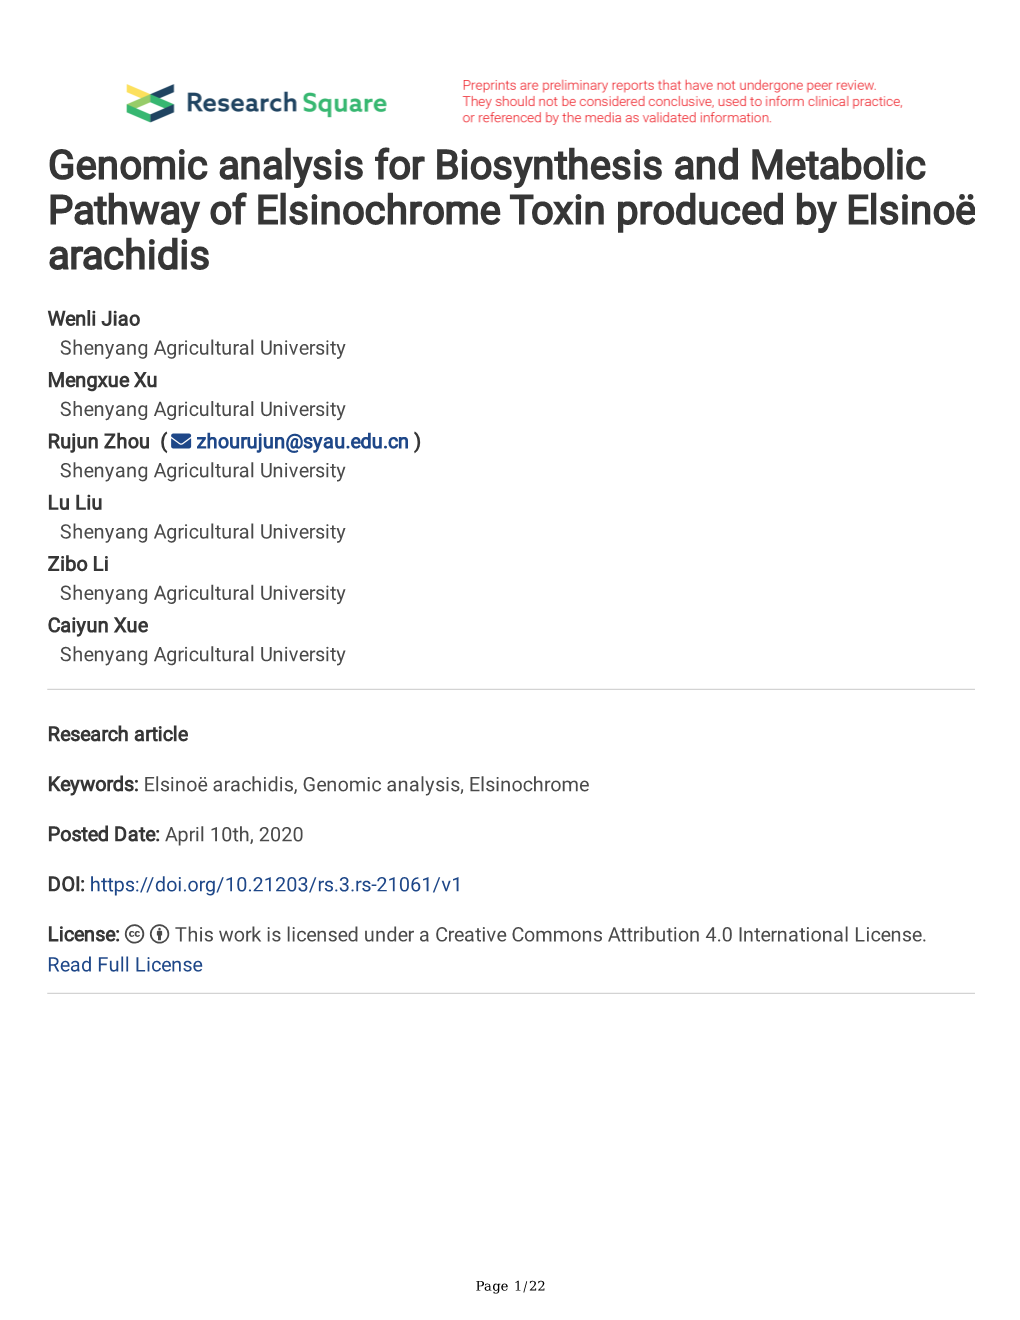 Genomic Analysis for Biosynthesis and Metabolic Pathway of Elsinochrome Toxin Produced by Elsinoë Arachidis